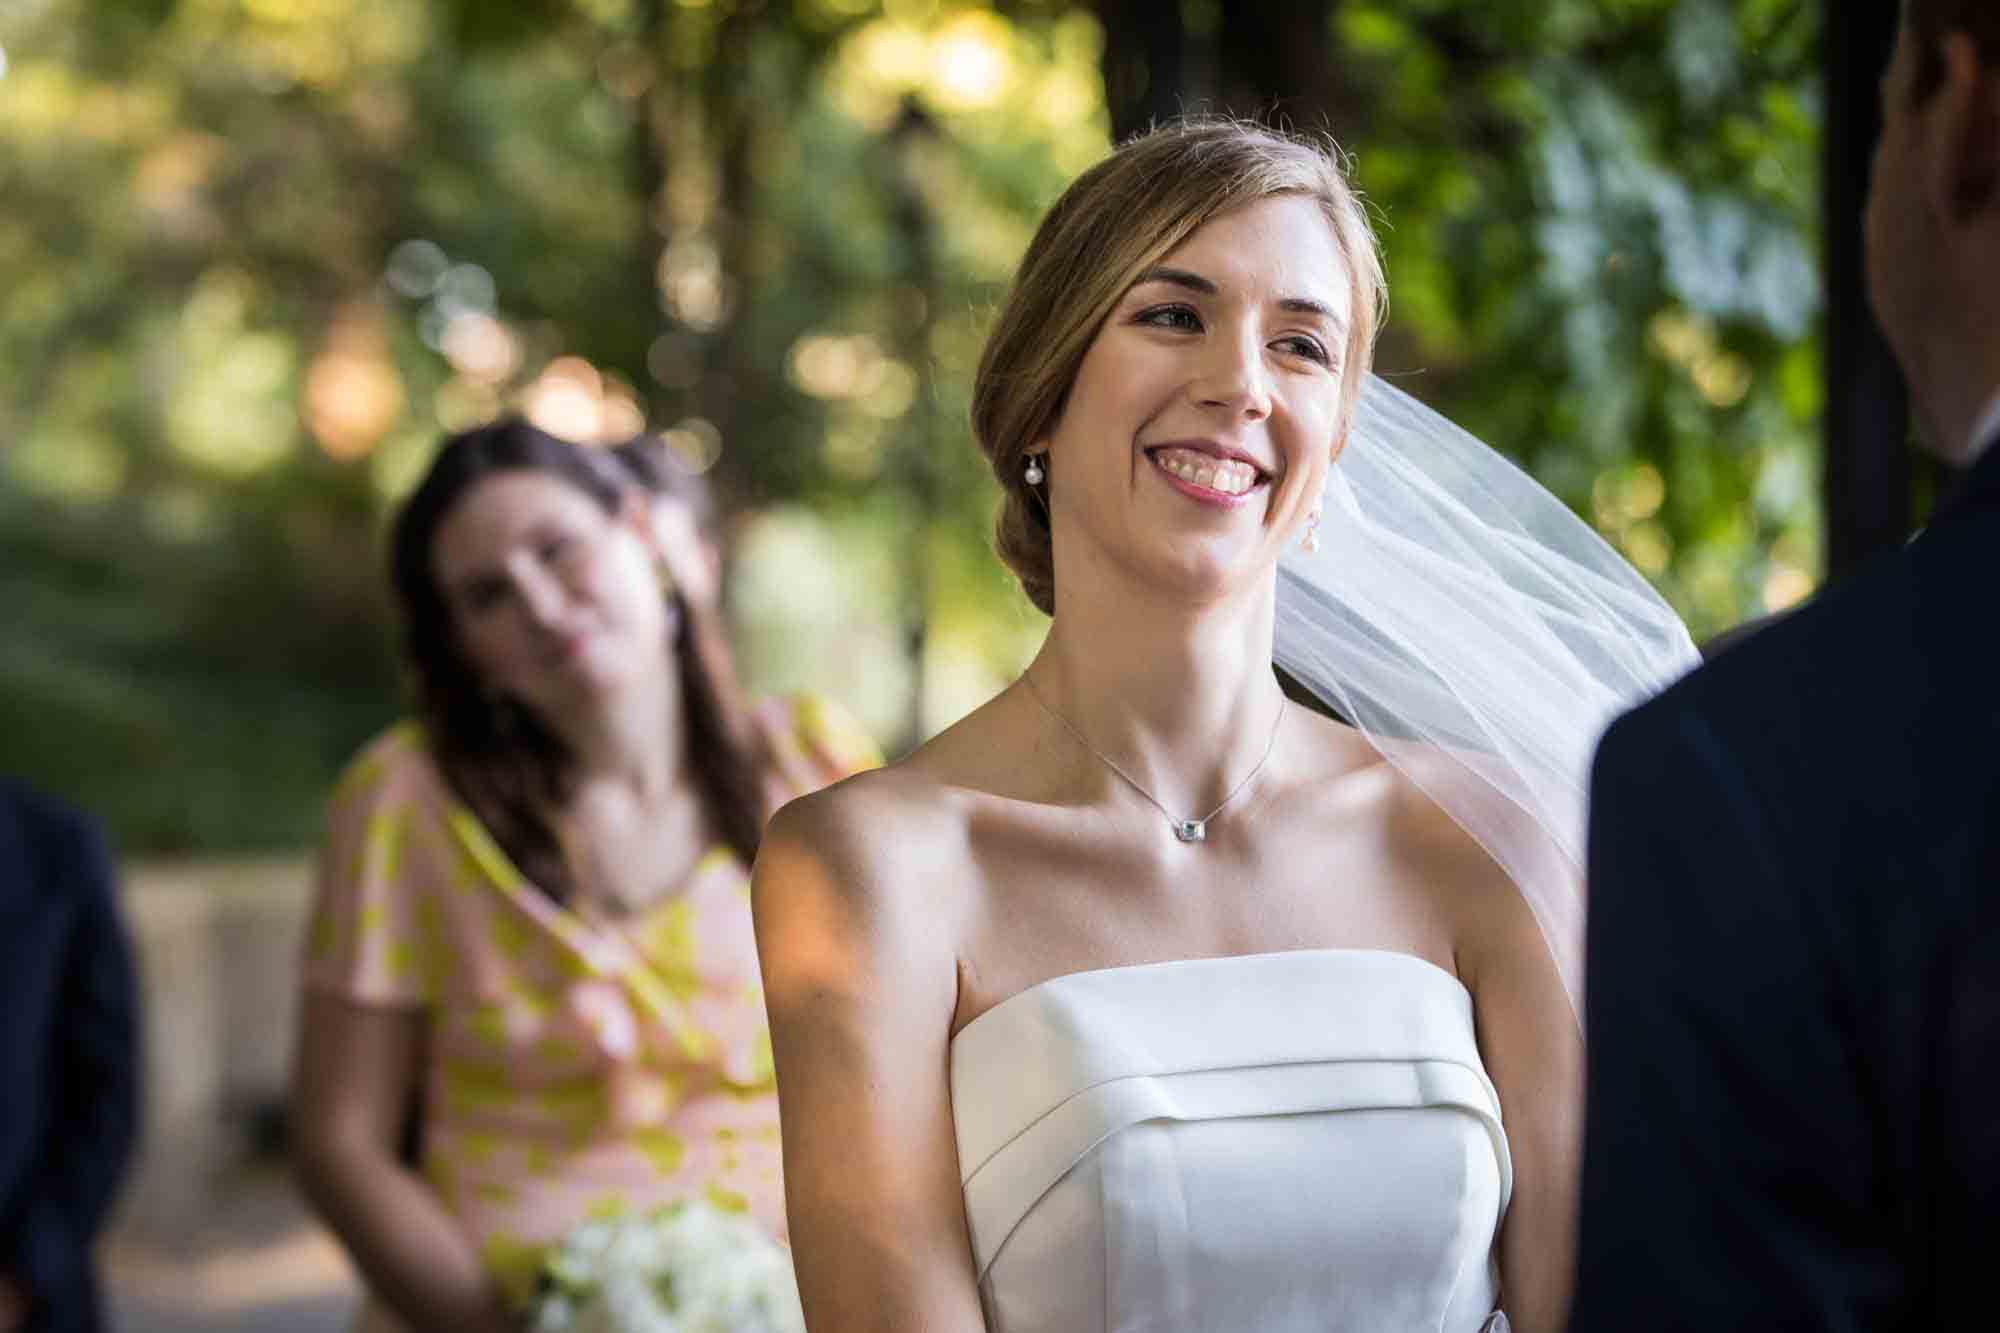 Bride laughing with veil blowing during a Conservatory Garden wedding in Central Park